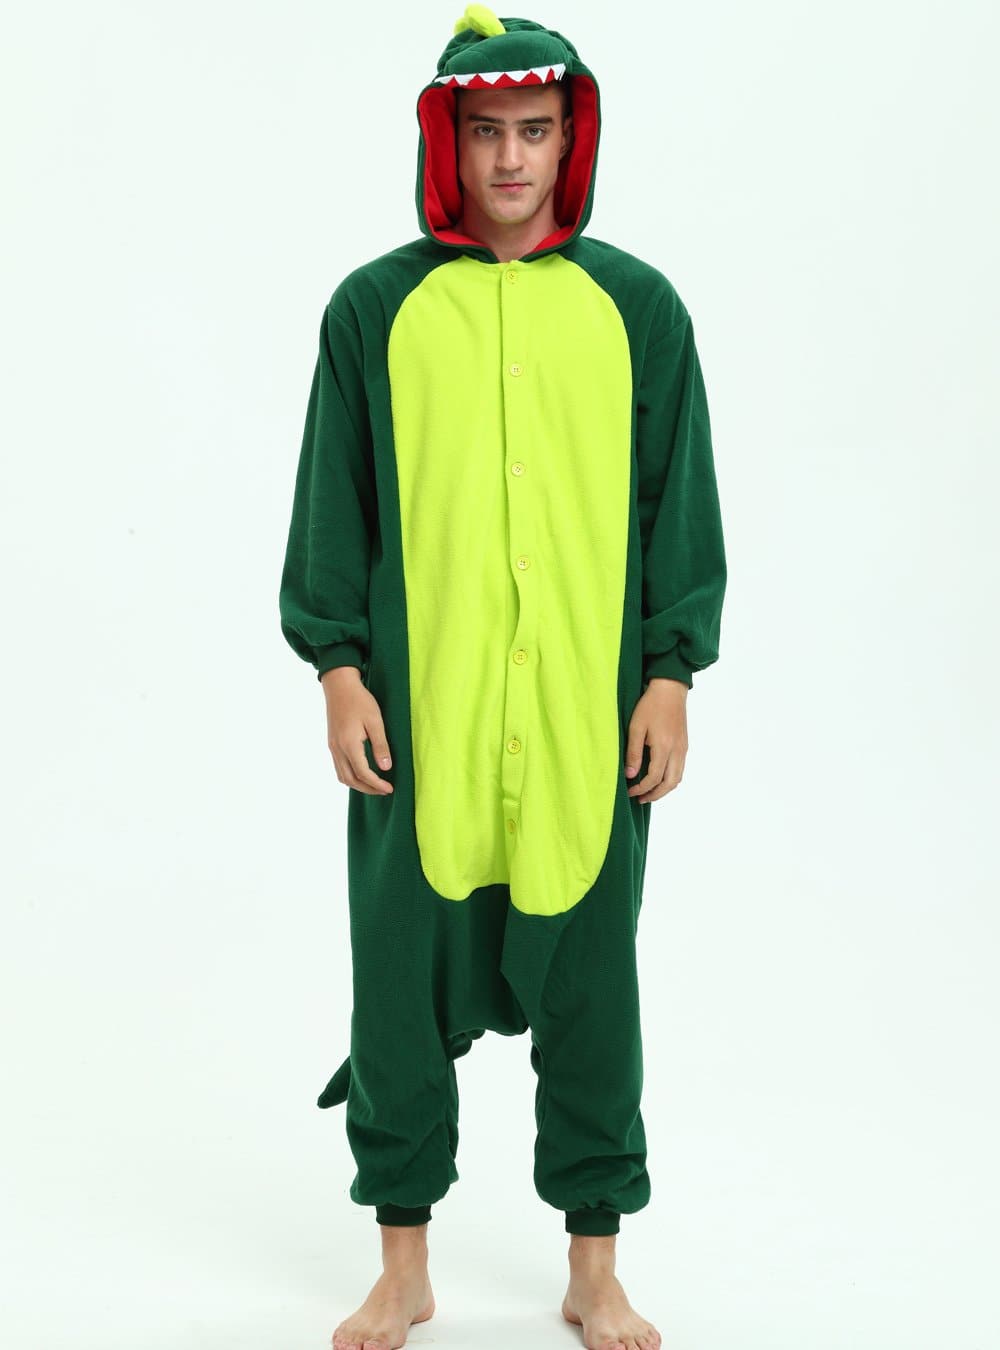 Green Dinosaur Onesie Costume For Adults and Teenagers